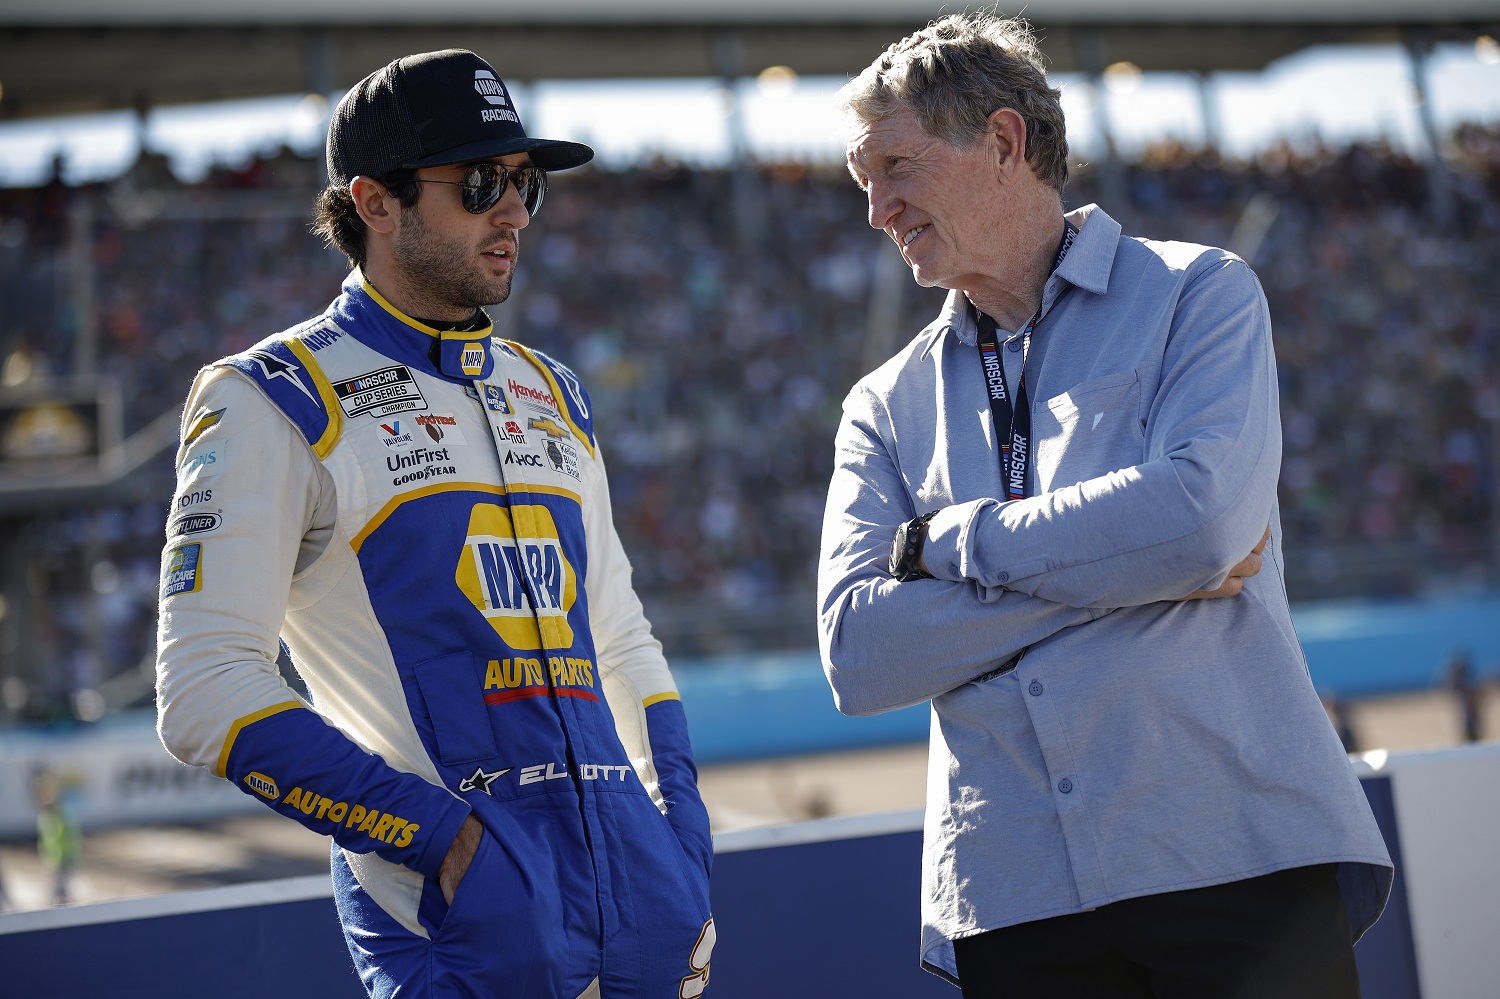 Chase Elliott talks to his father, Hall of Famer Bill Elliott, on the grid prior to the NASCAR Cup Series Championship at Phoenix Raceway on Nov. 6, 2022. | Jared C. Tilton/Getty Images